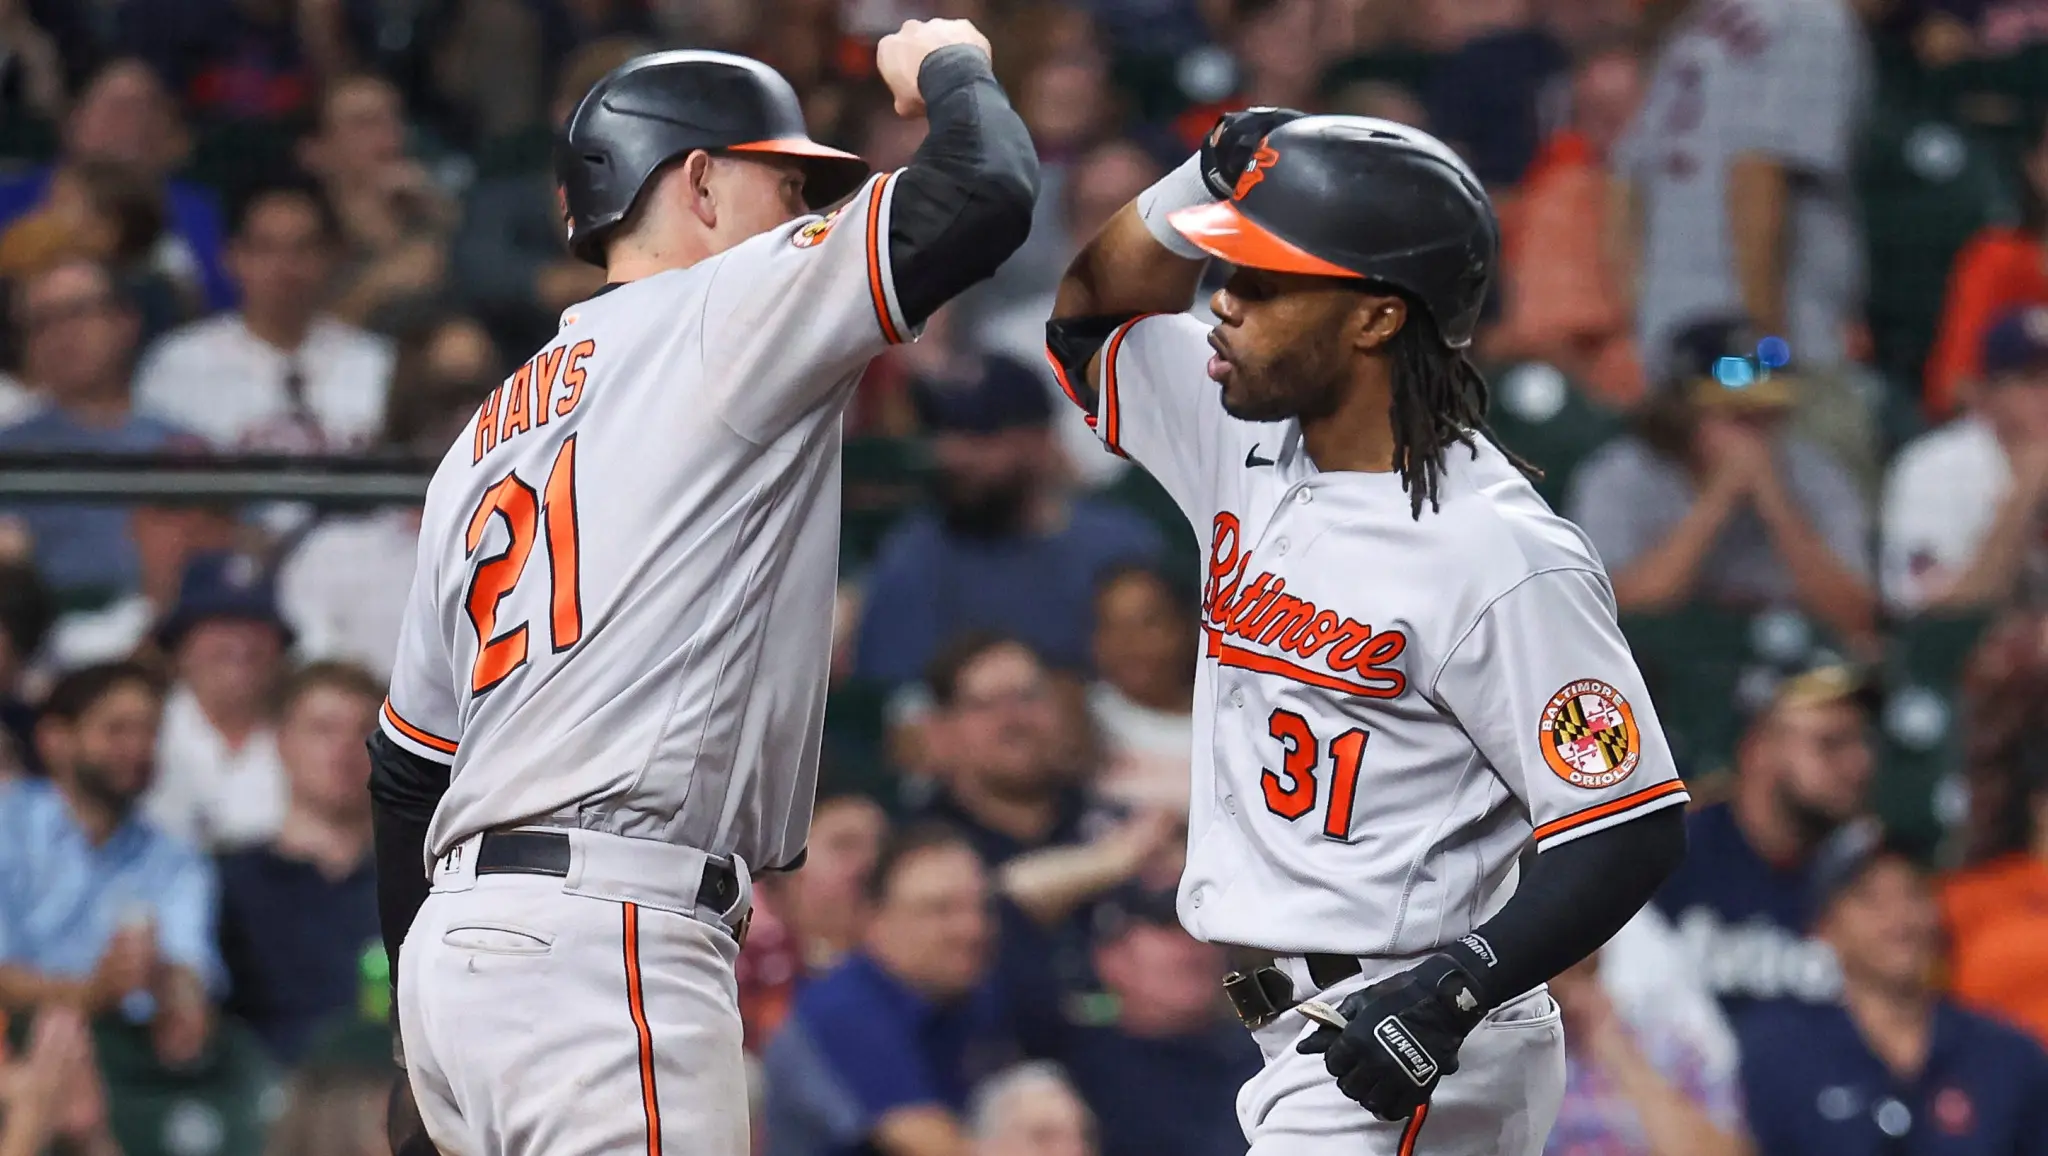 NBC Sports - The Baltimore Orioles are the first